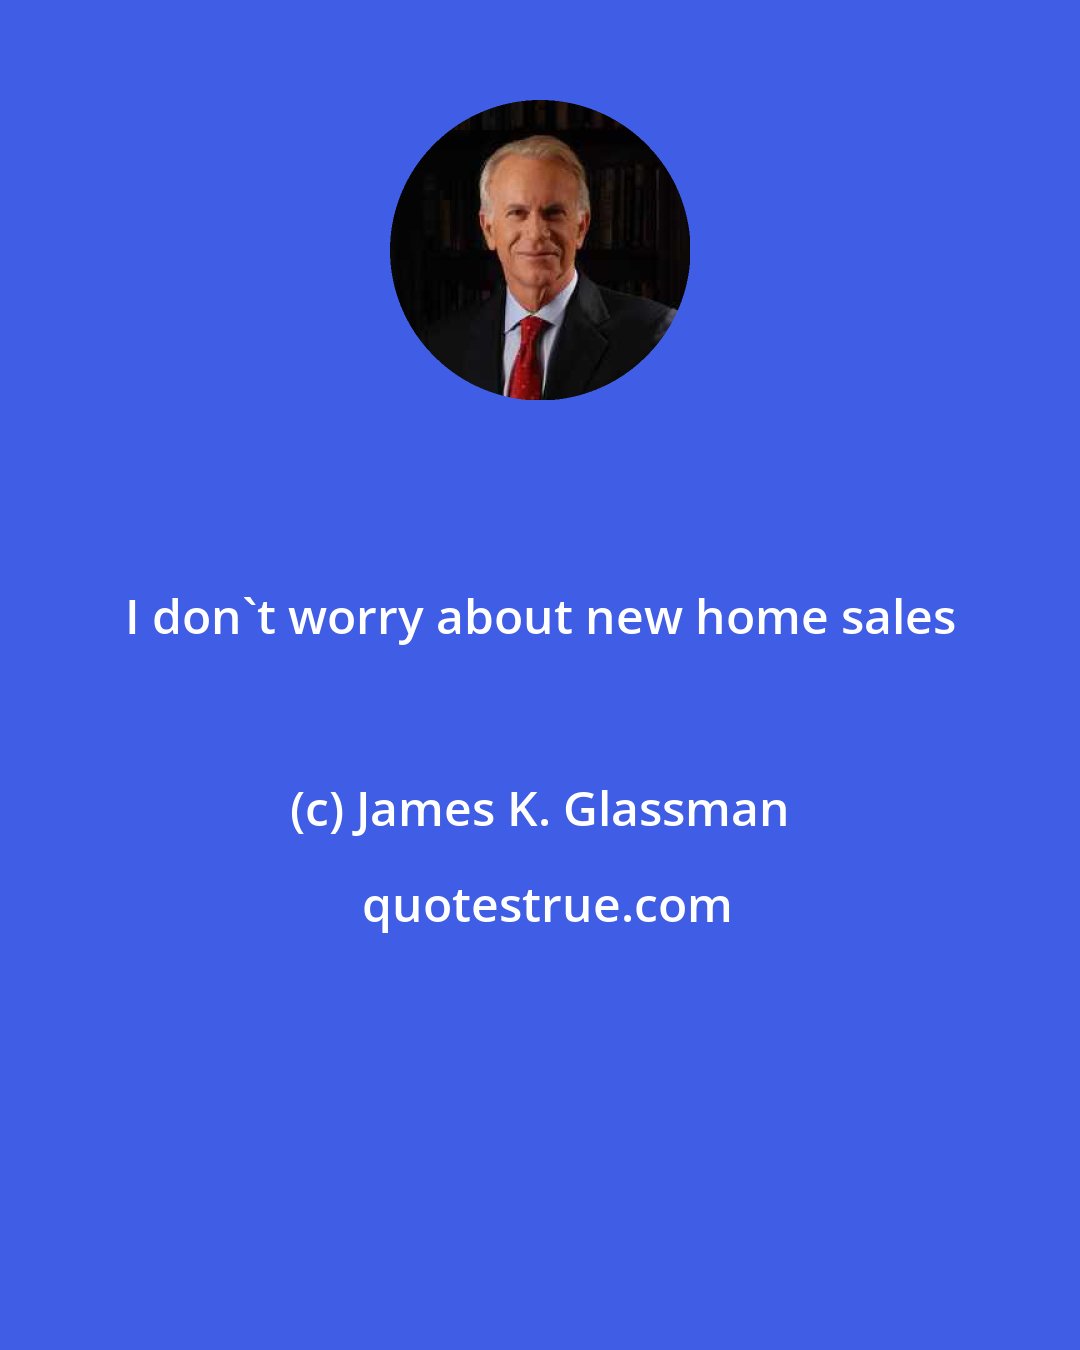 James K. Glassman: I don't worry about new home sales